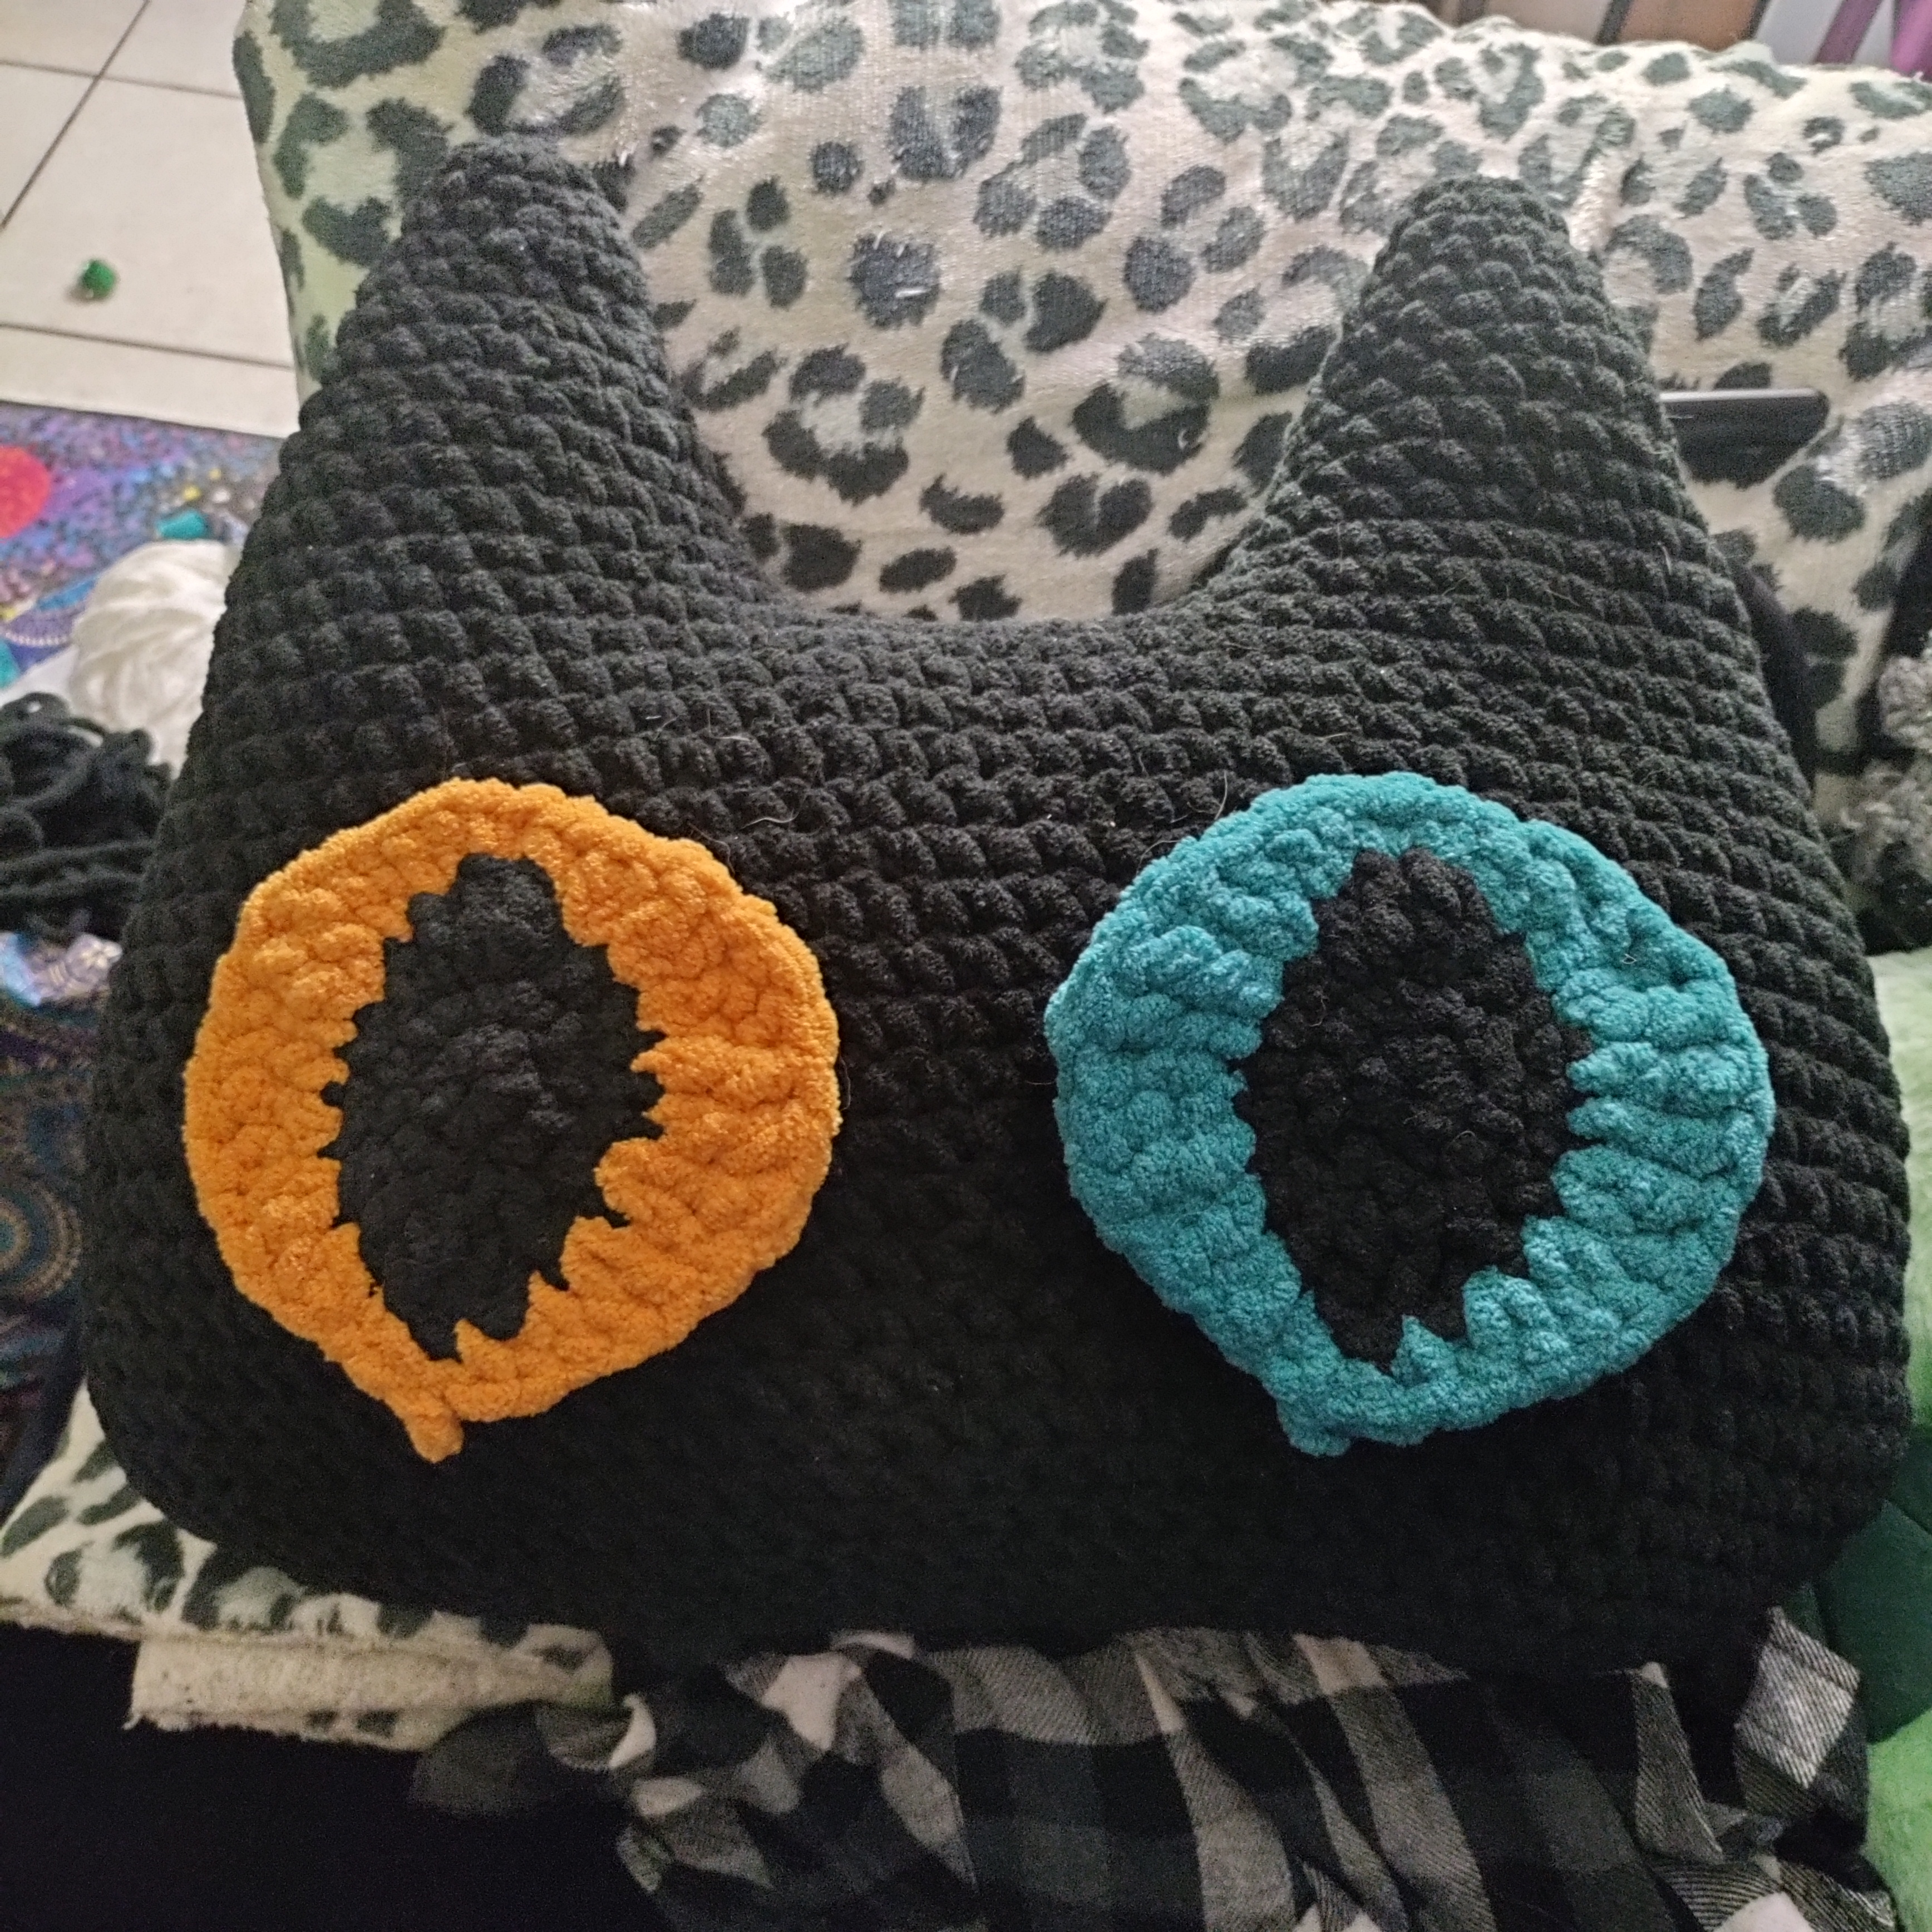 a large crocheted black cat head with one golden yellow eye and one teal eye